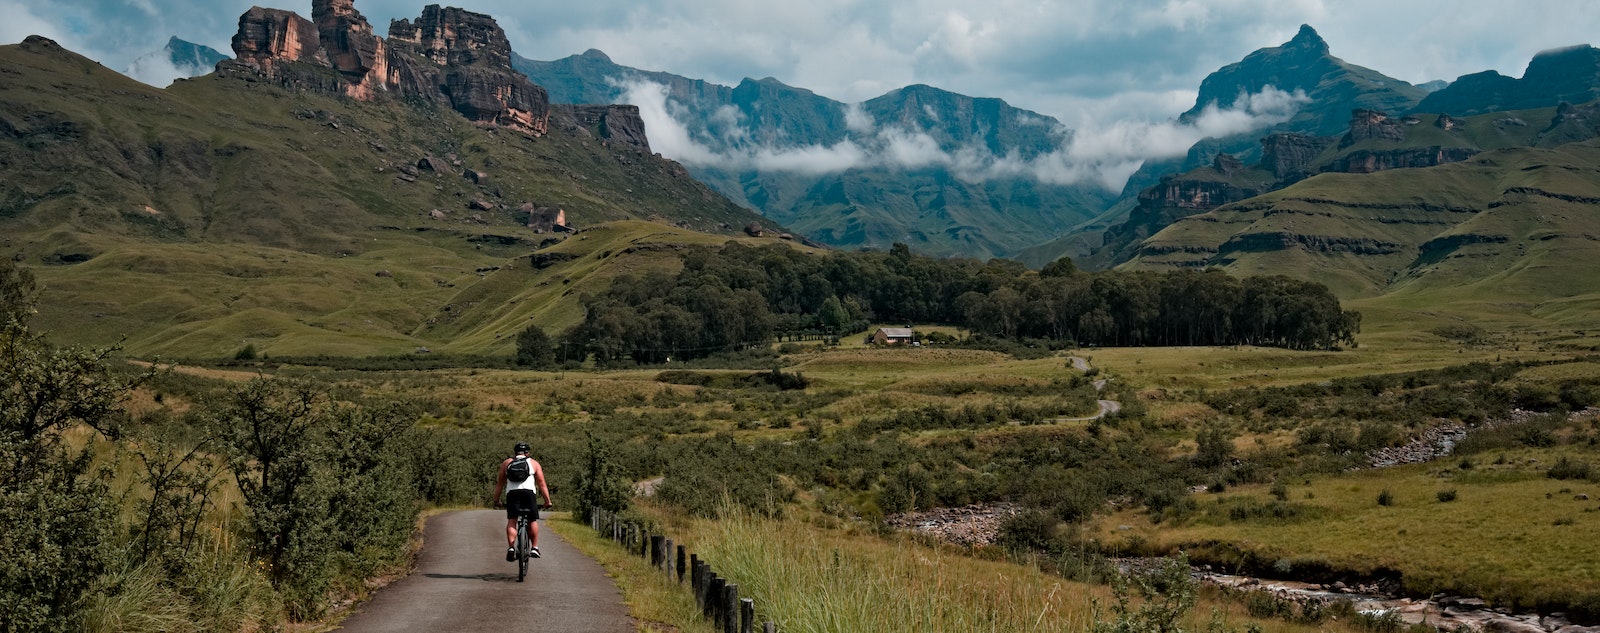 a man riding a bicycle in a mountain valley